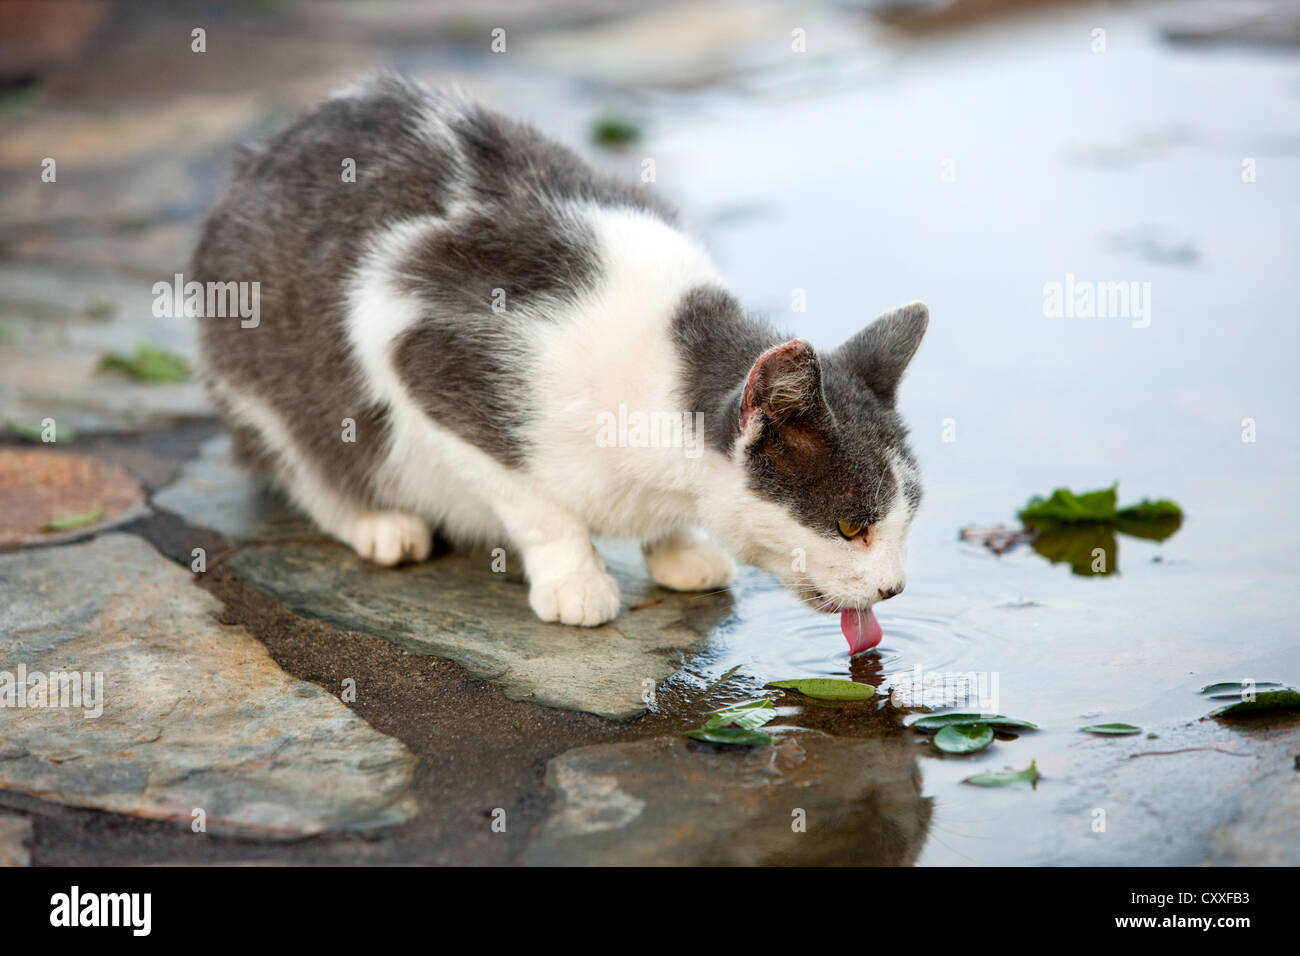 Cat drinking water from a puddle, Tenerife, Spain, Europe Stock Photo